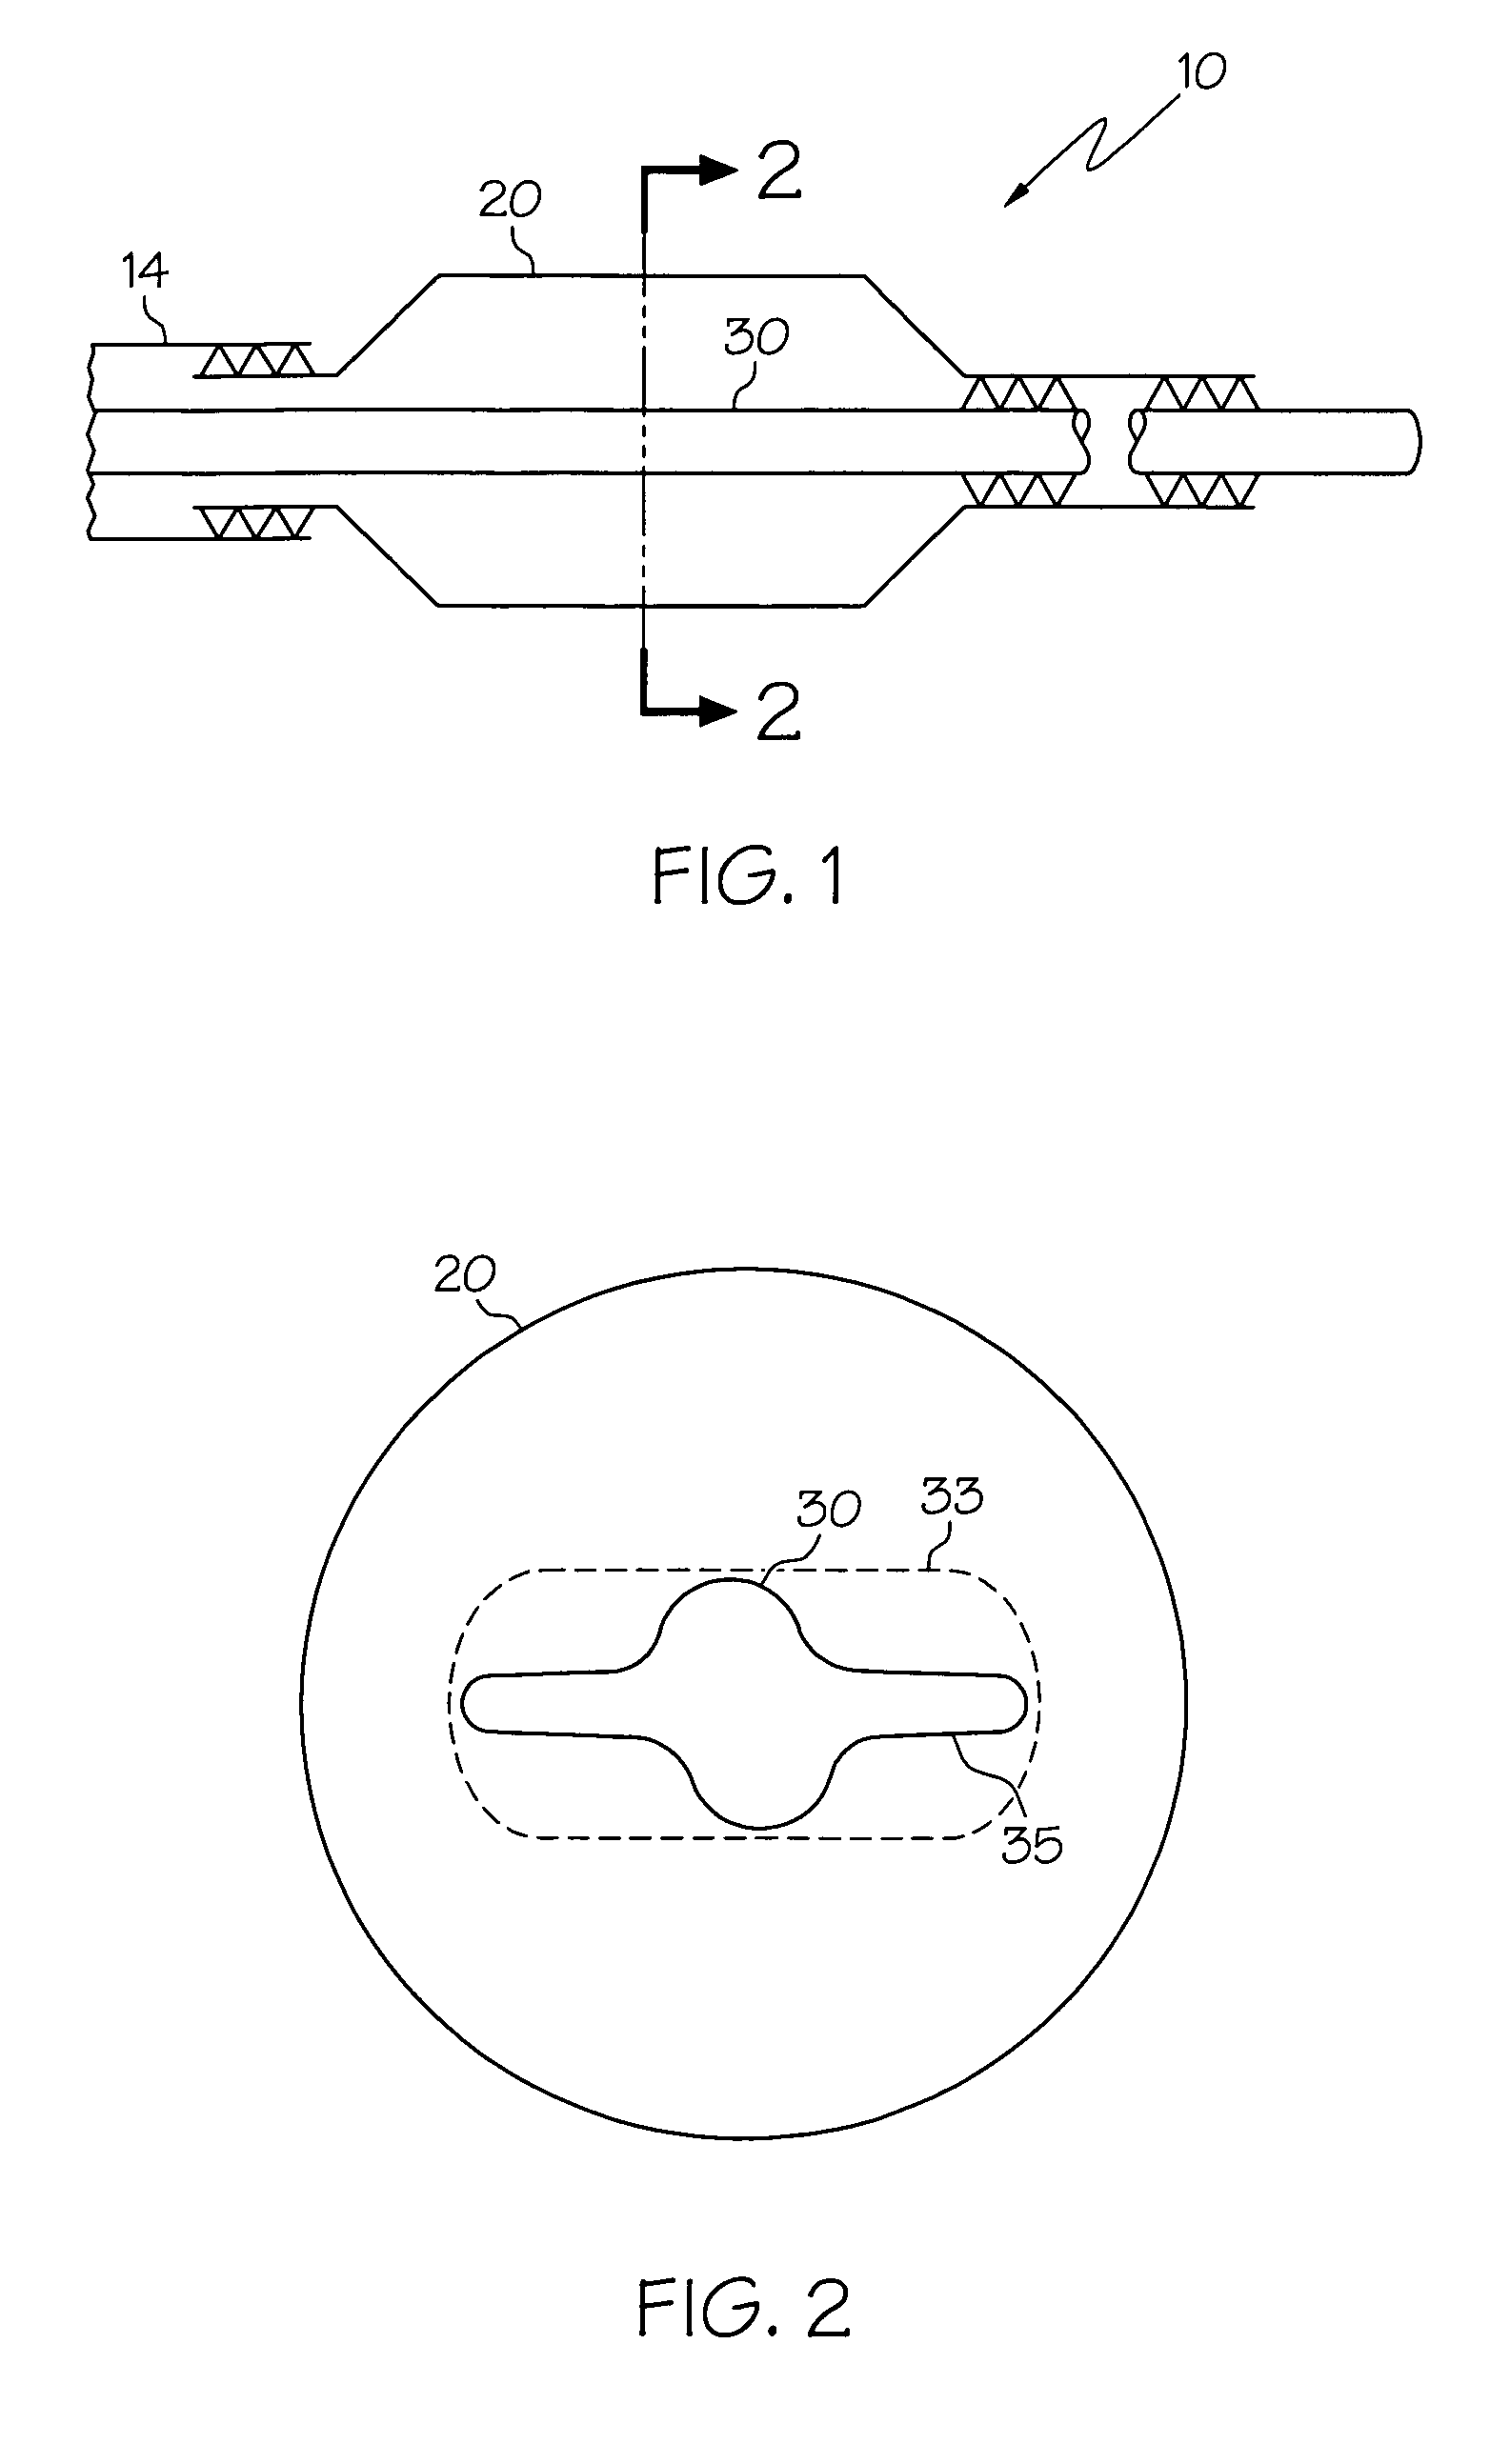 Balloon catheter with expandable wire lumen